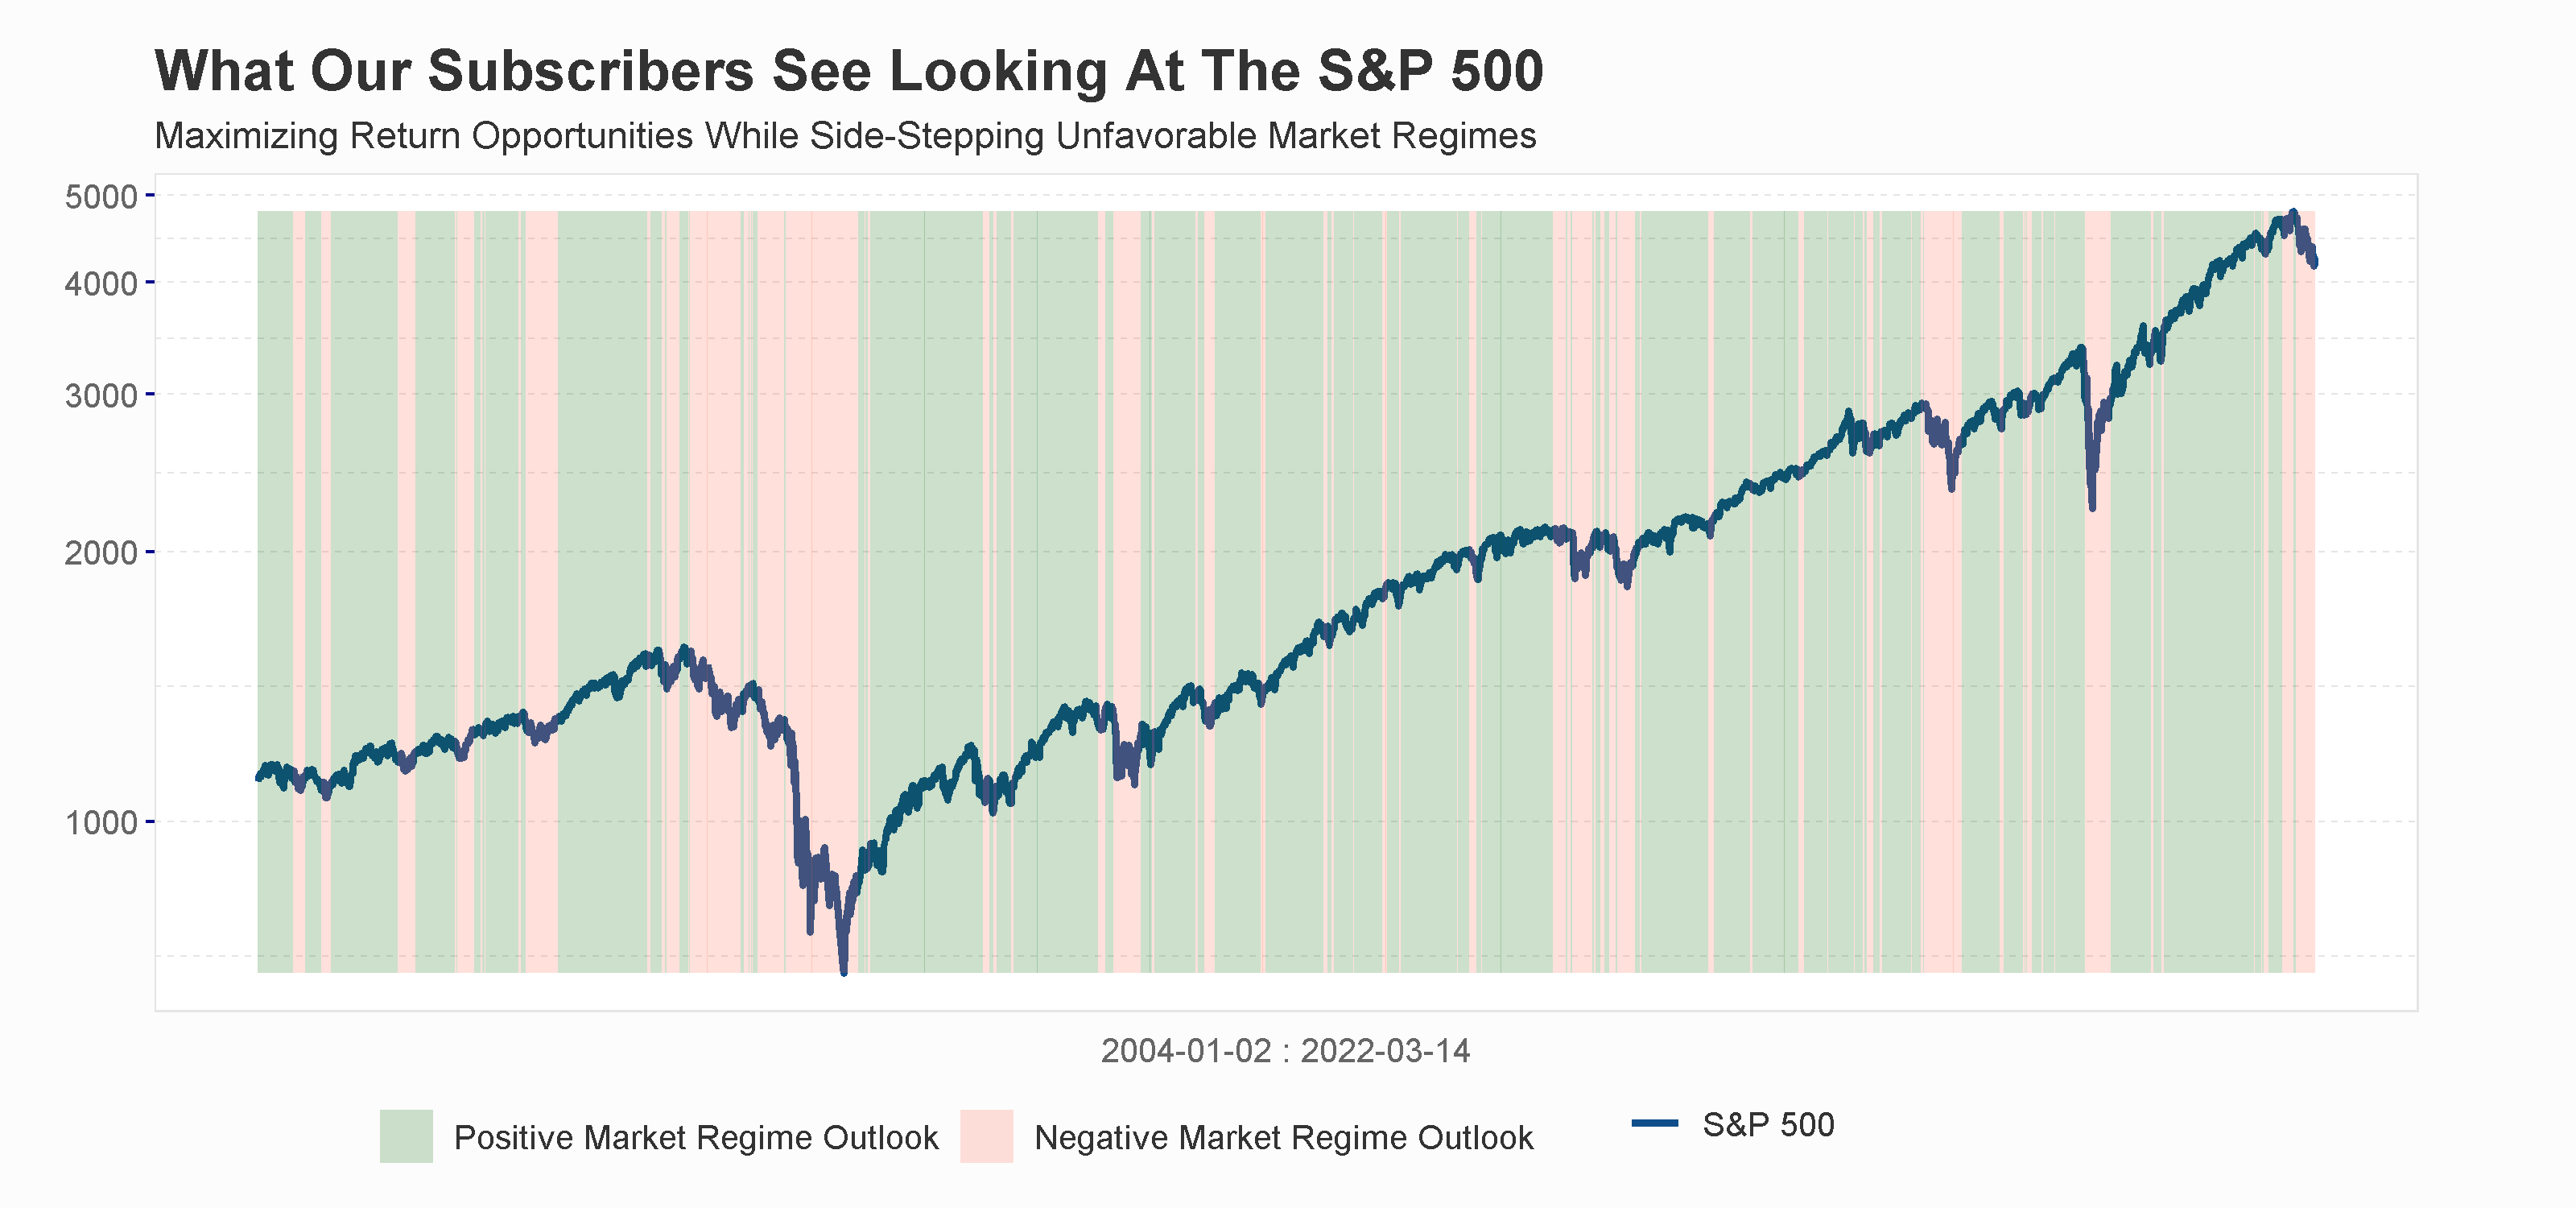 How WE see the S&P